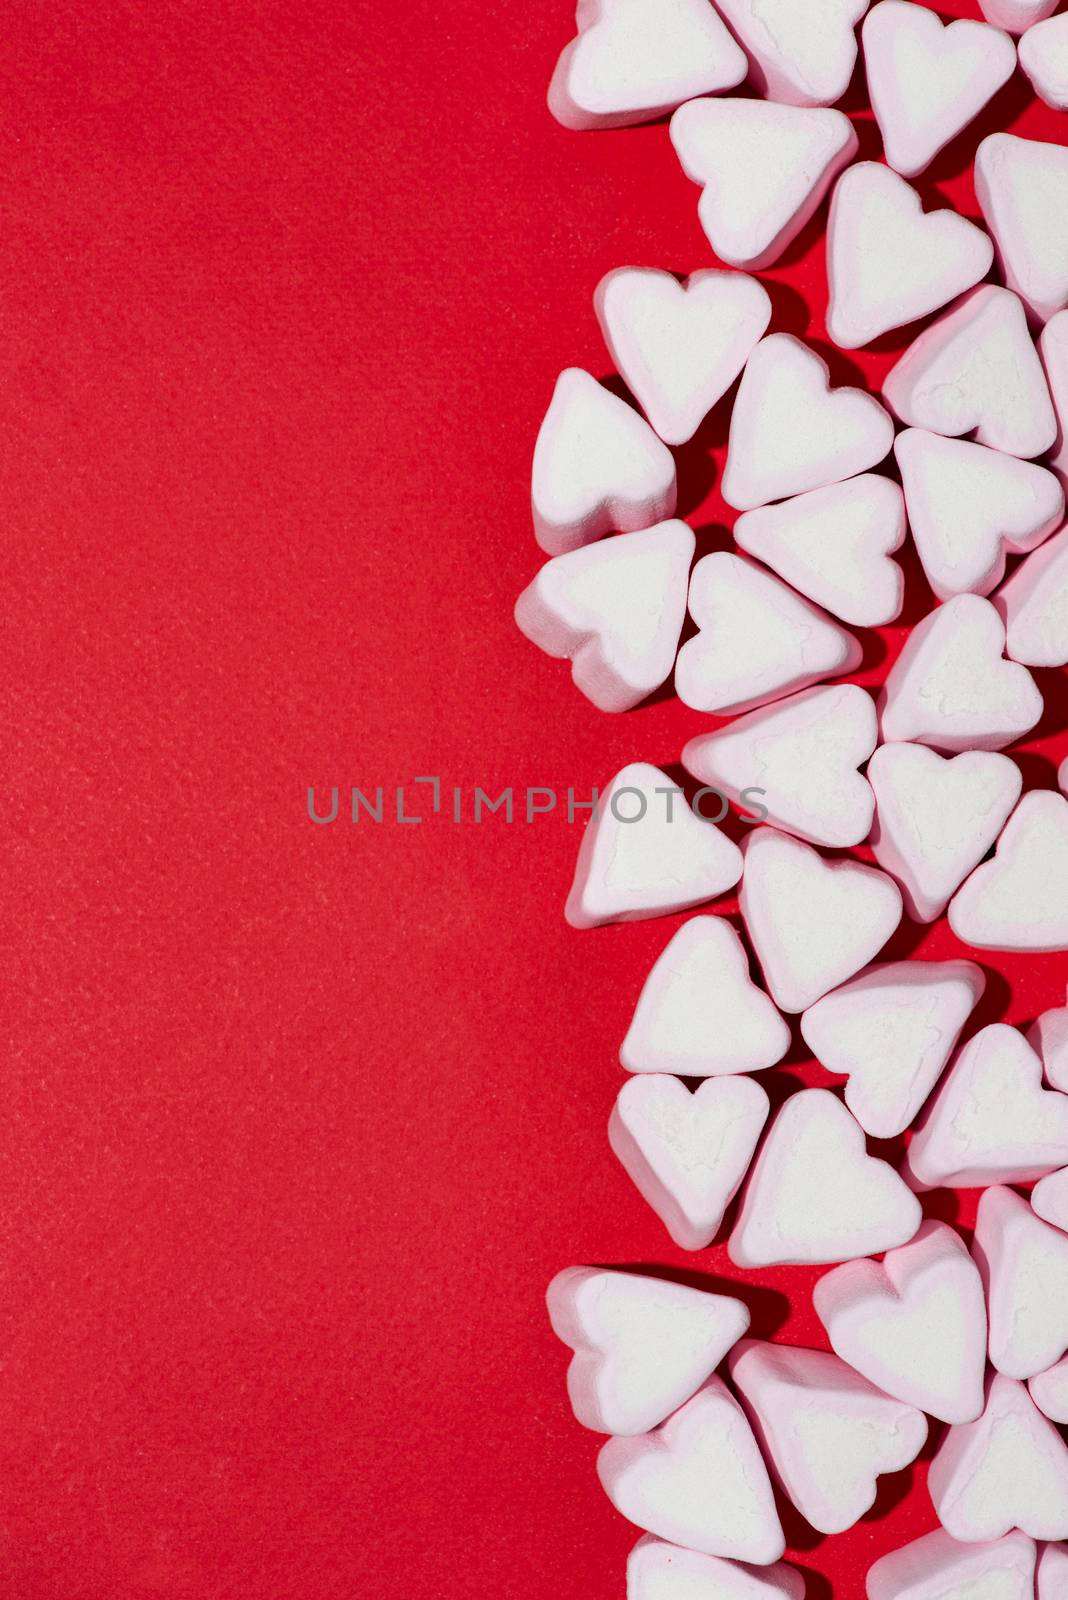 Valentines Day candy hearts marshmallows over red background by makidotvn